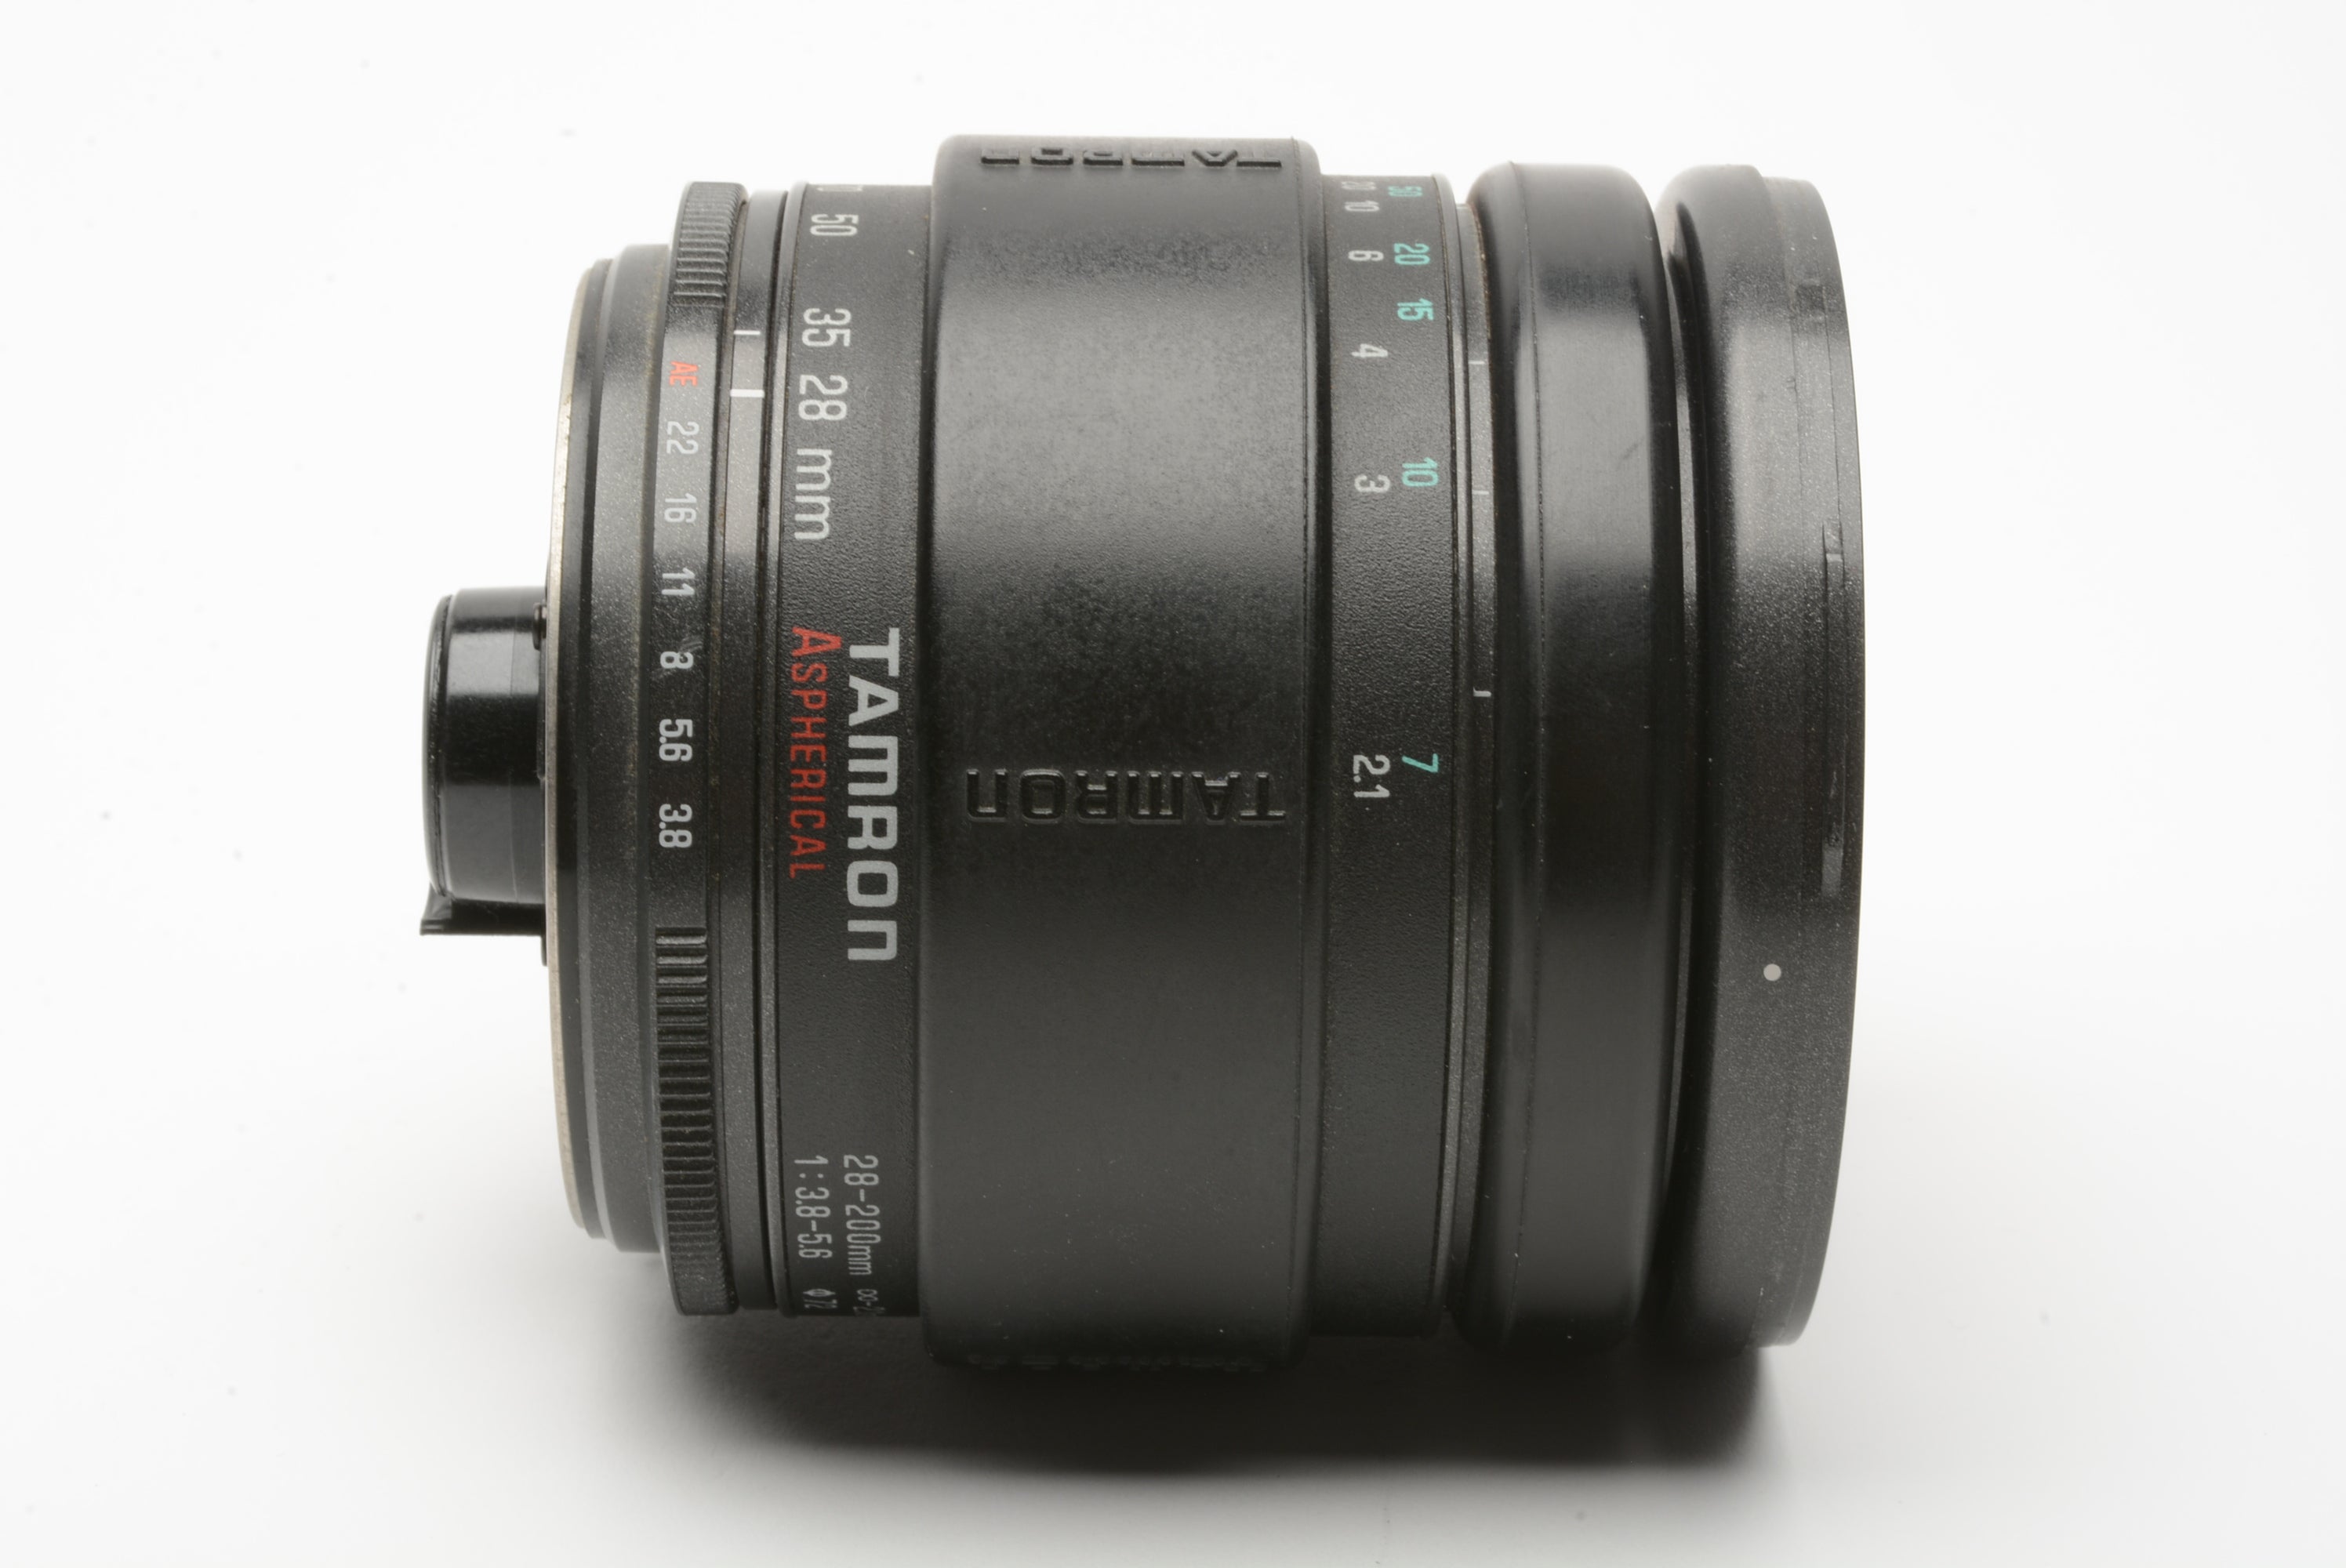 Tamron MF 28-200mm f3.8-5.6 Aspherical zoom lens 71A w/choice of